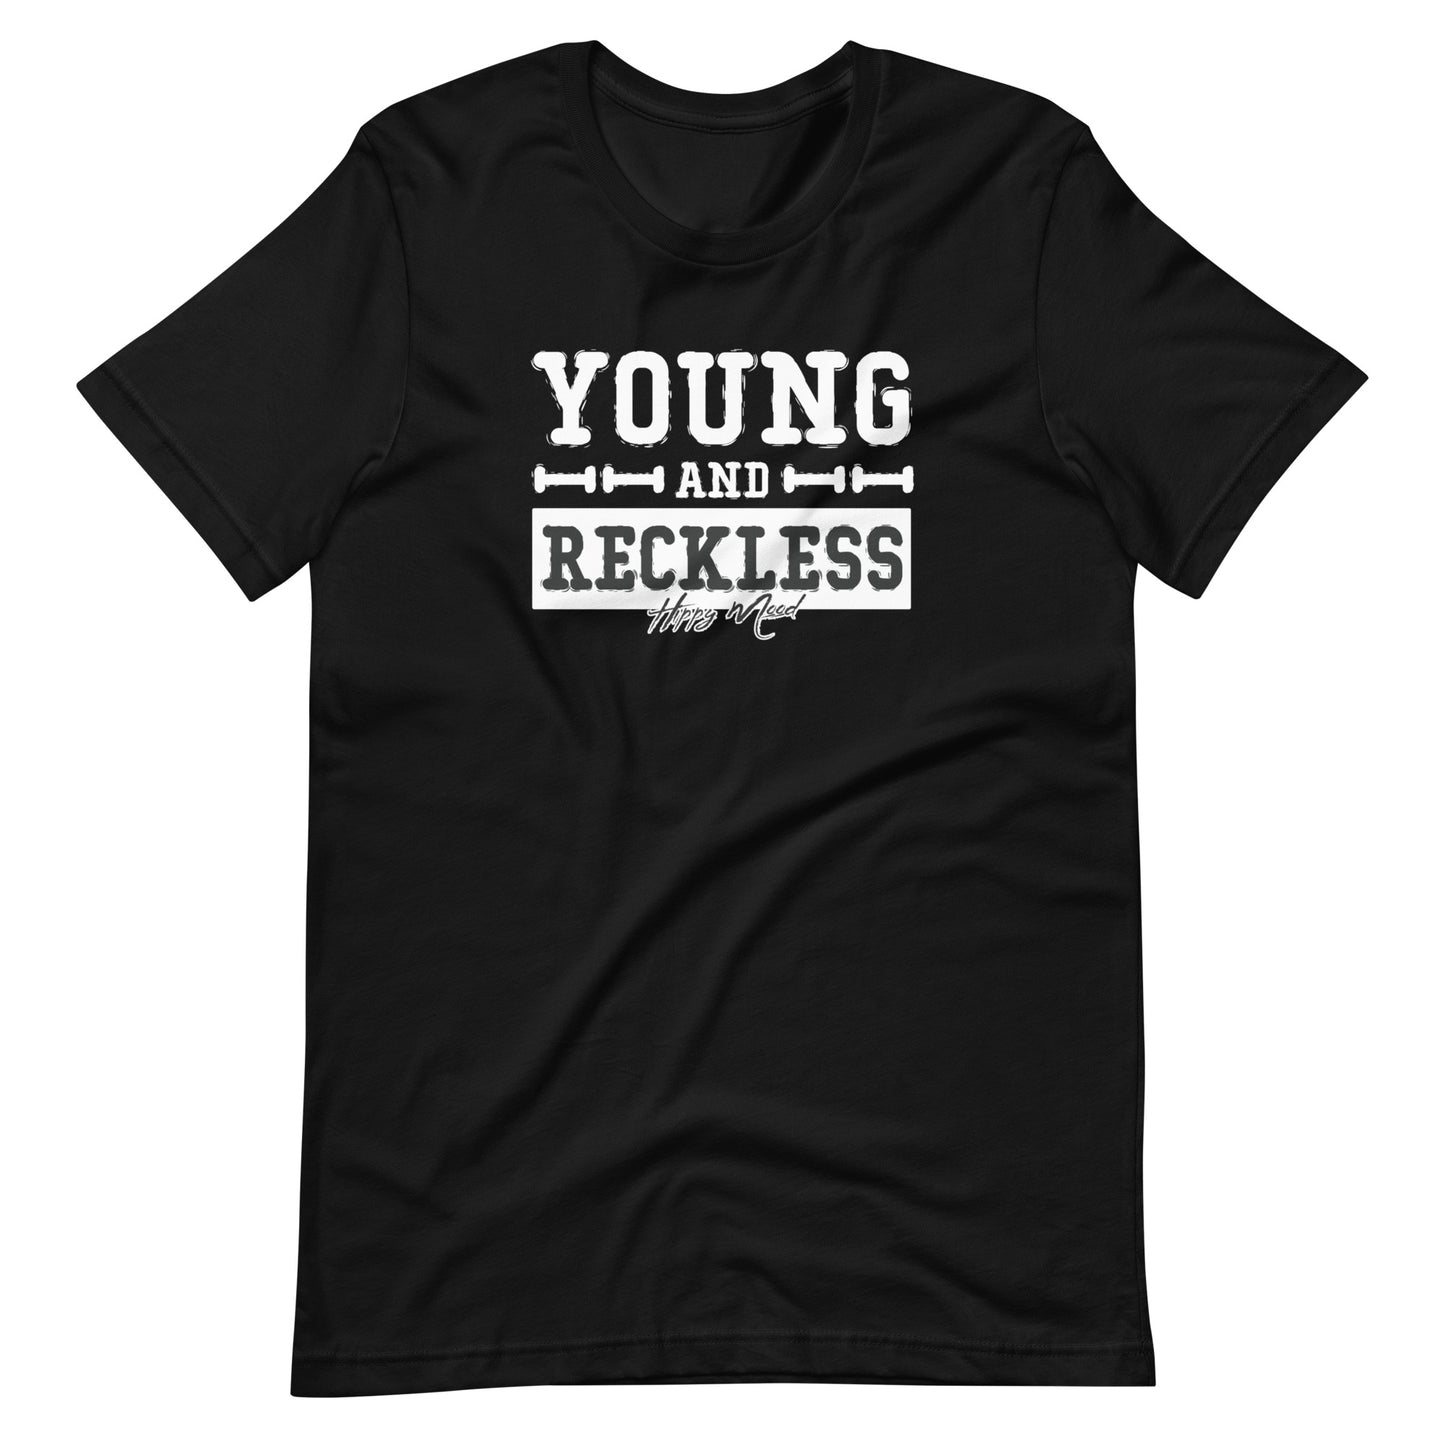 Young & Reckless | Unisex t-shirt